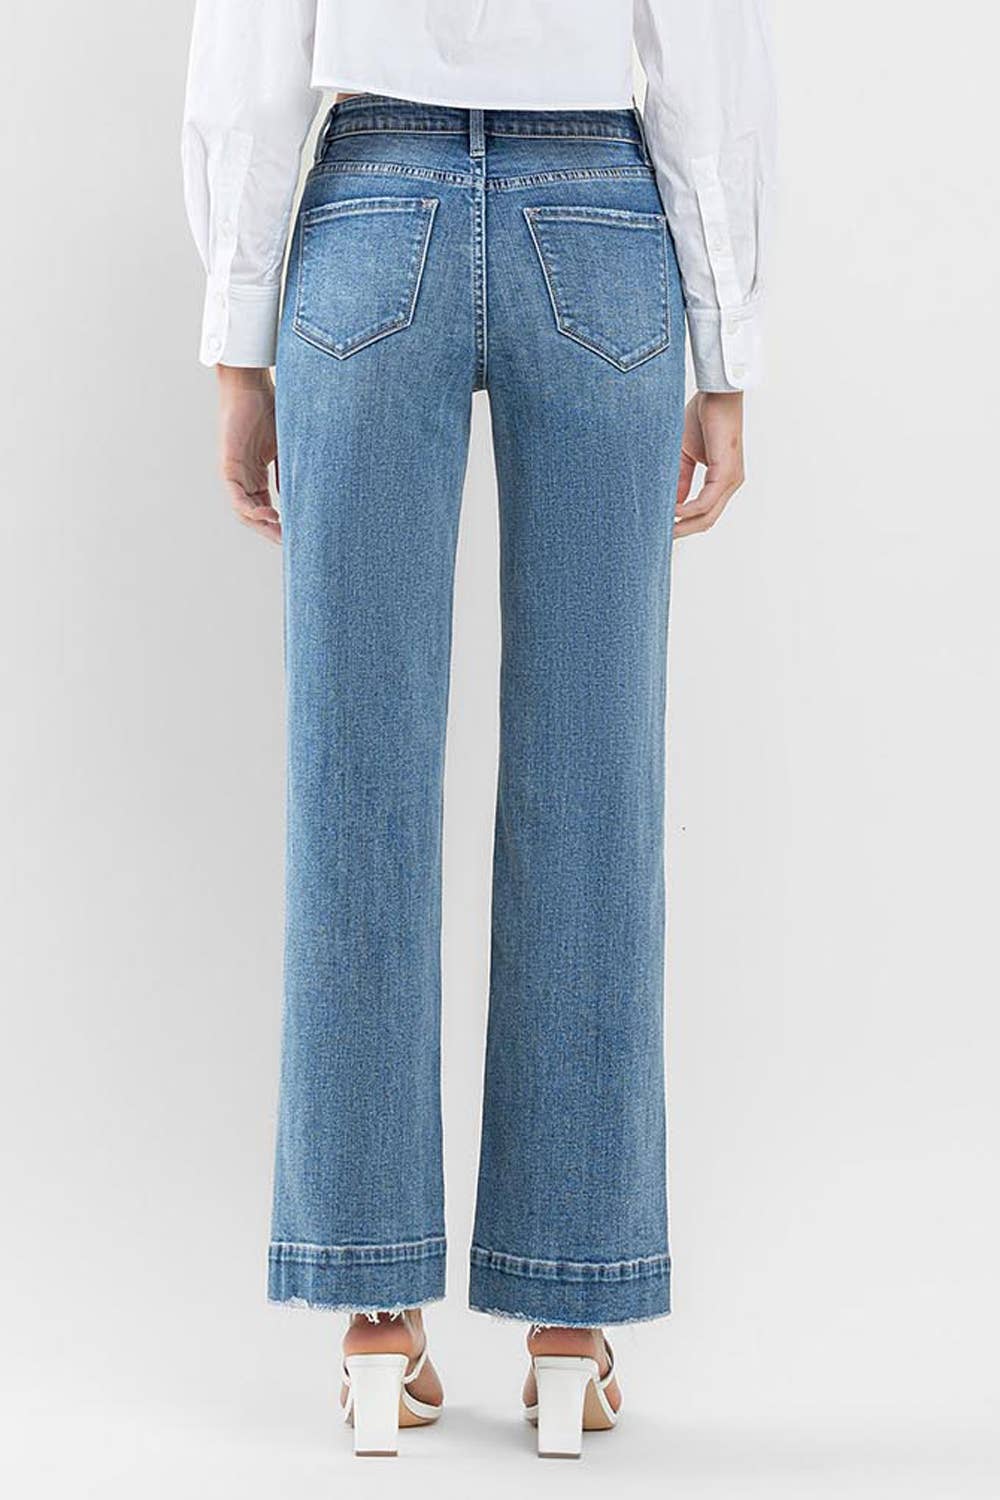 FLYING MONKEY - HIGH RISE WIDE LEG JEANS WITH TROUSER HEM DETAIL F5391: PERMISSIBLE / 26